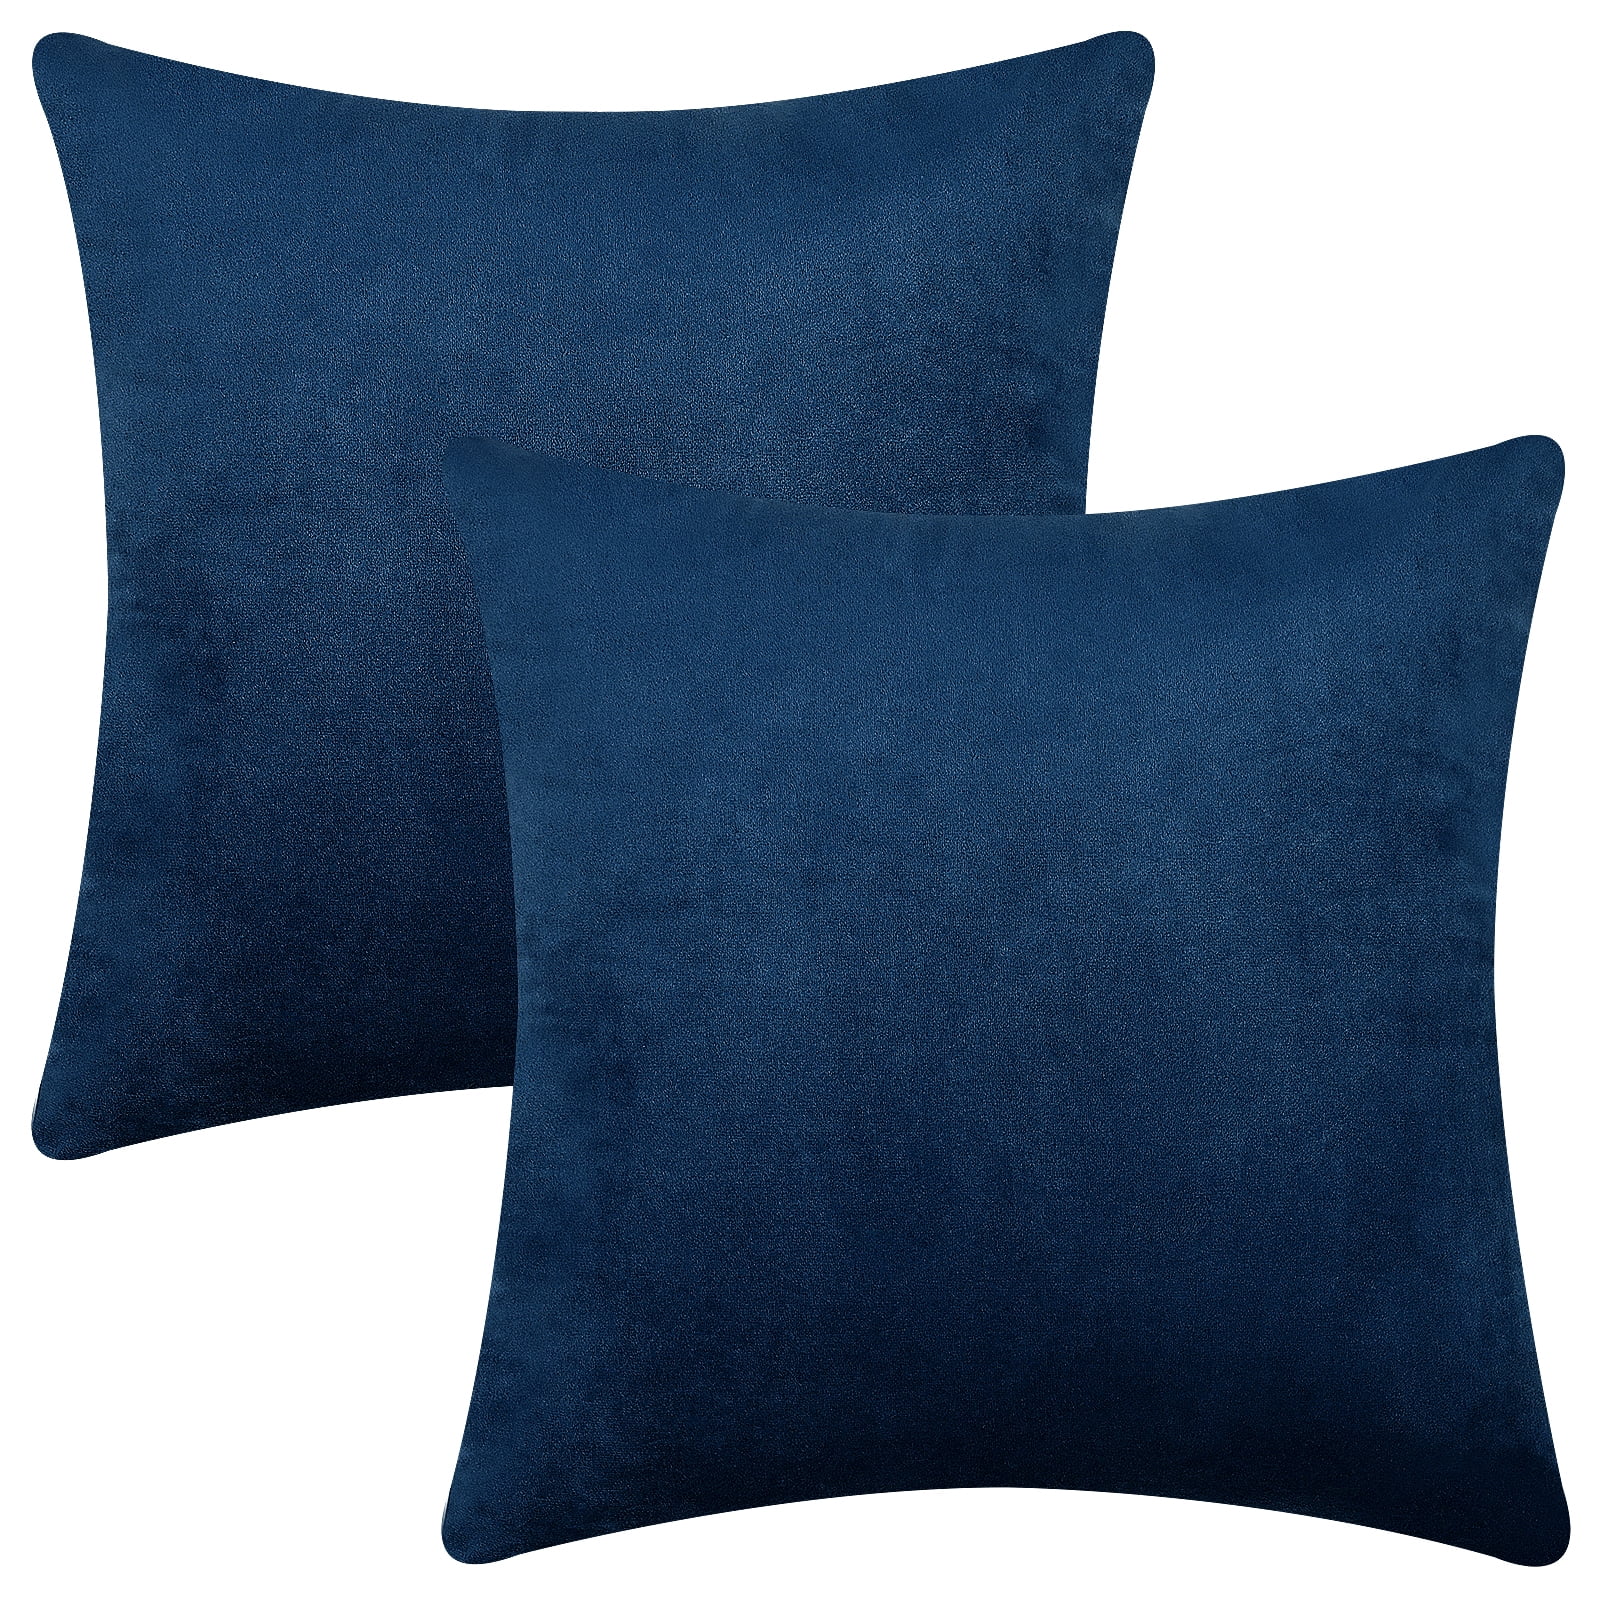 Eve 1st generation memory pillow rrp£59 